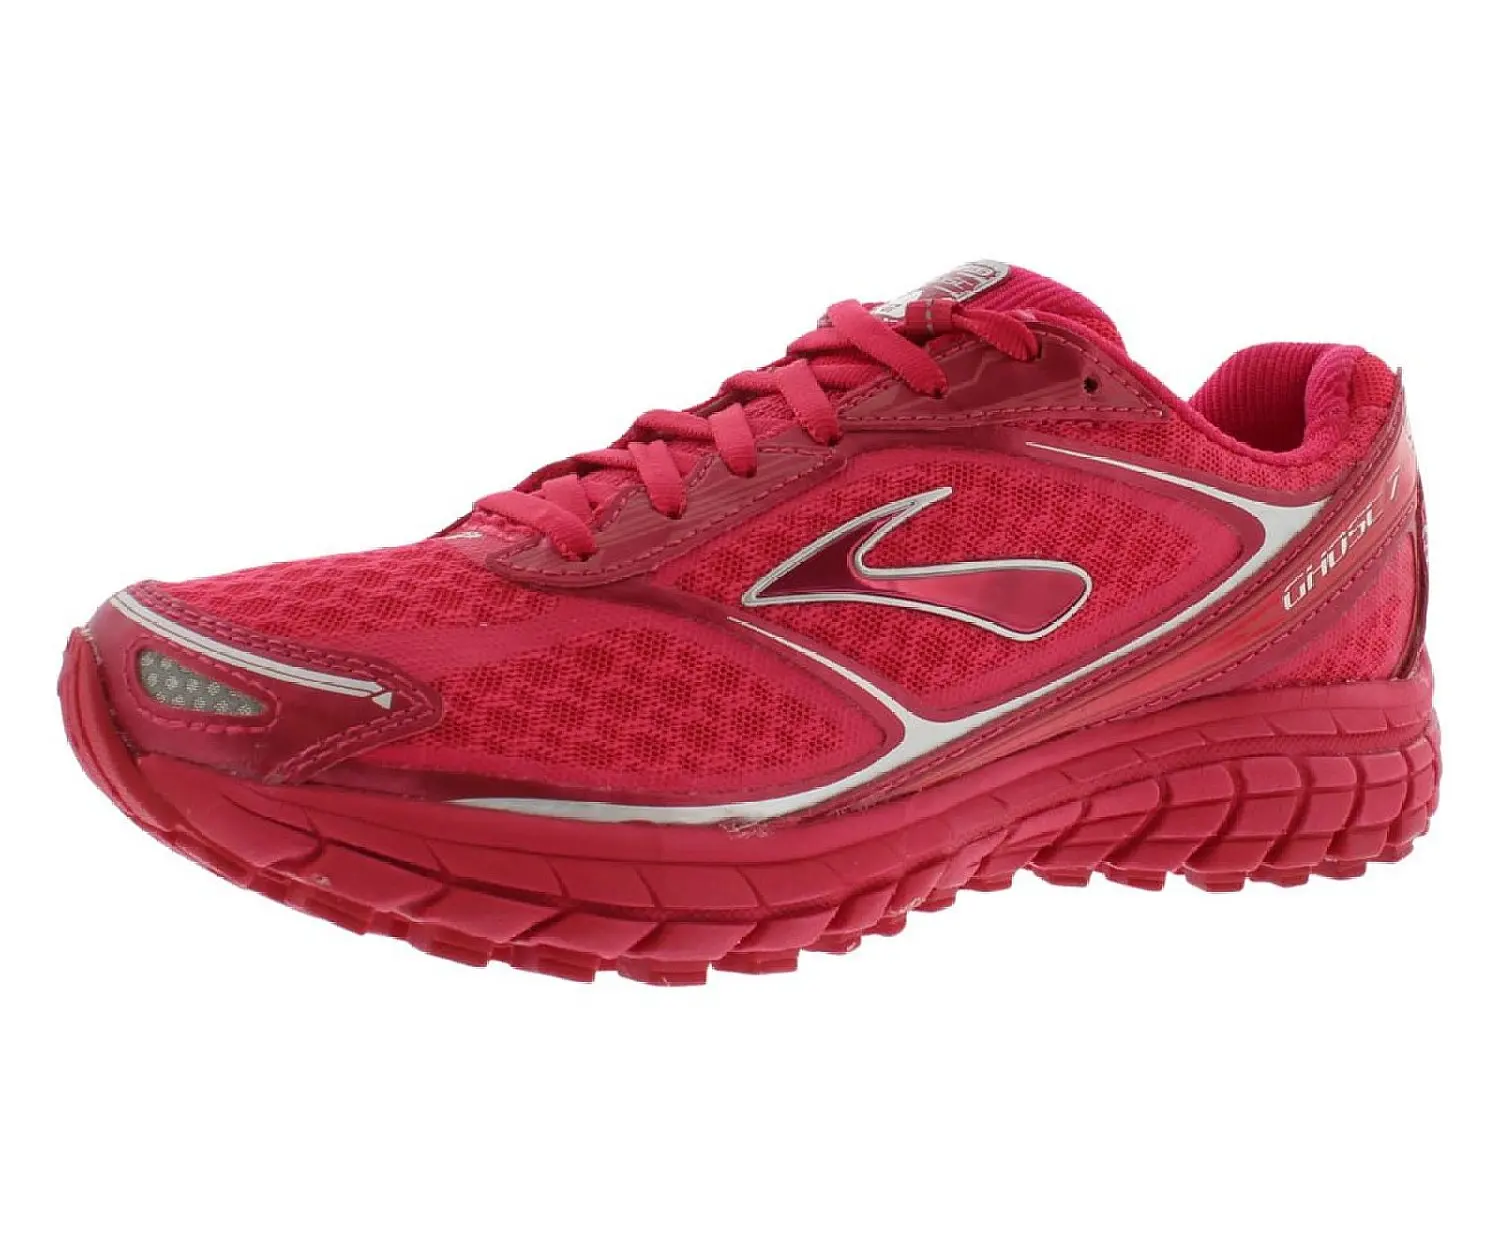 brooks ghost 7 womens silver